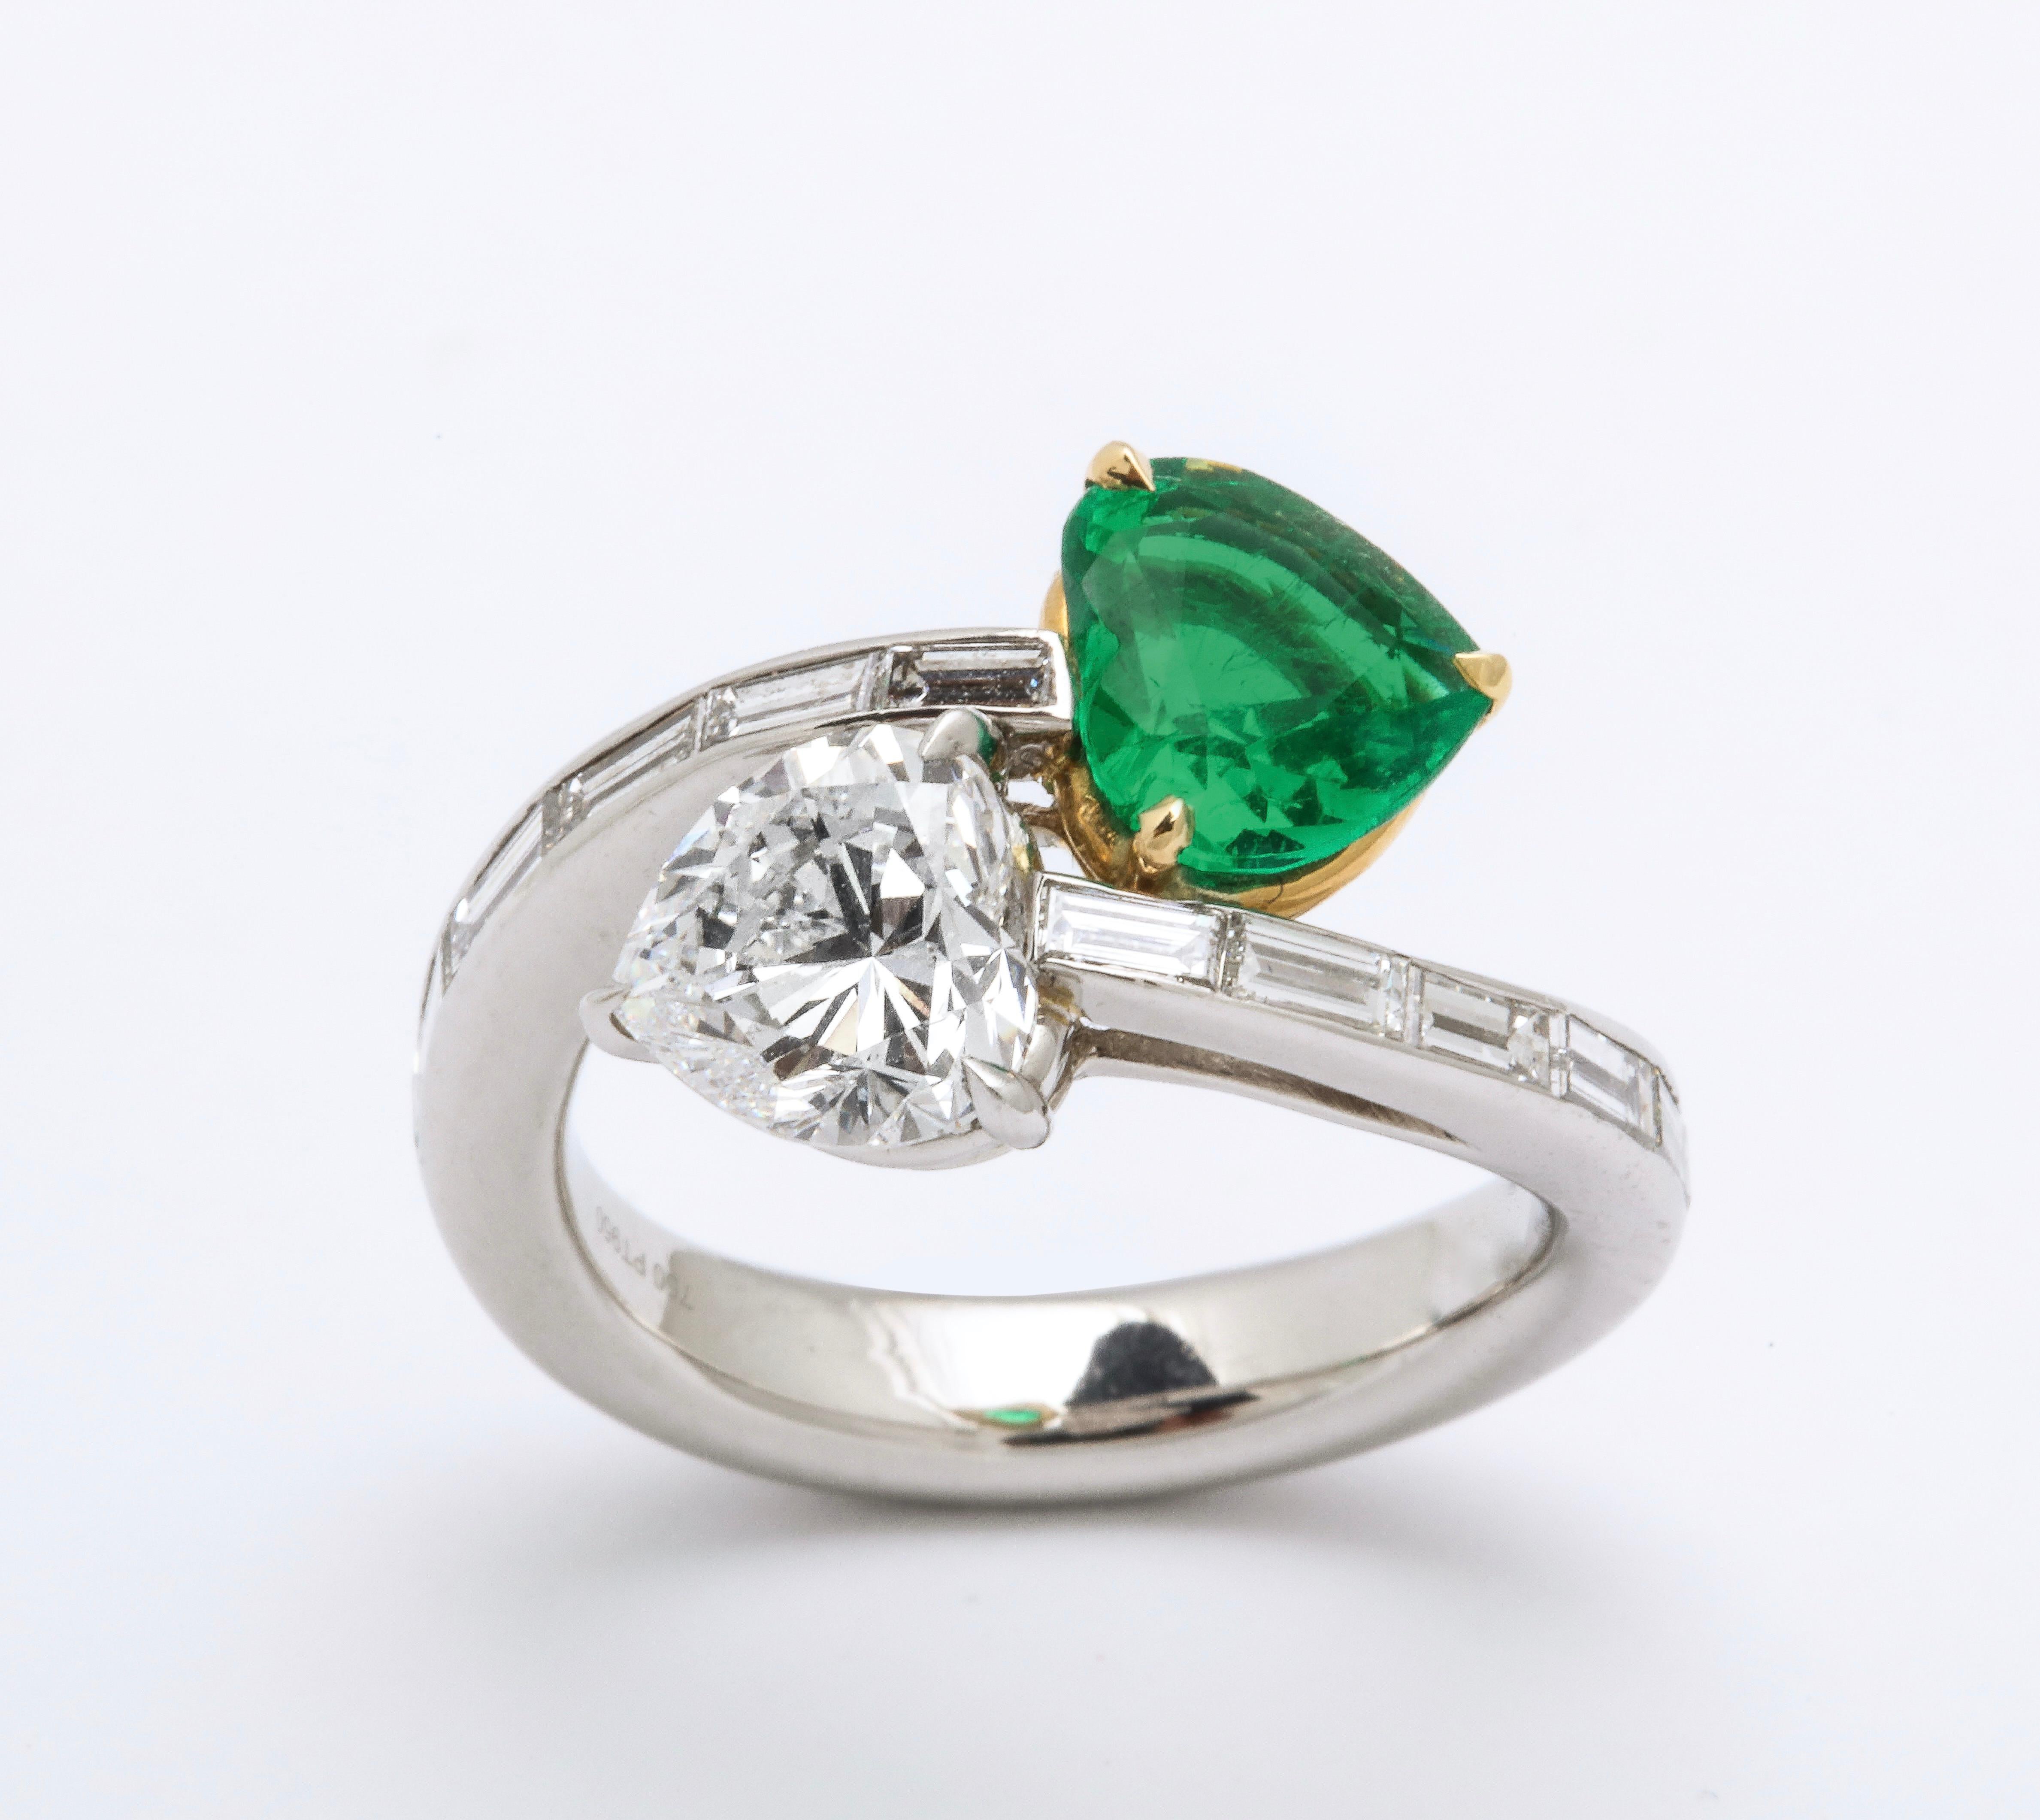 If a heart shape diamond epitomizes love, then the addition of a beautiful matching emerald makes everything that much better.  